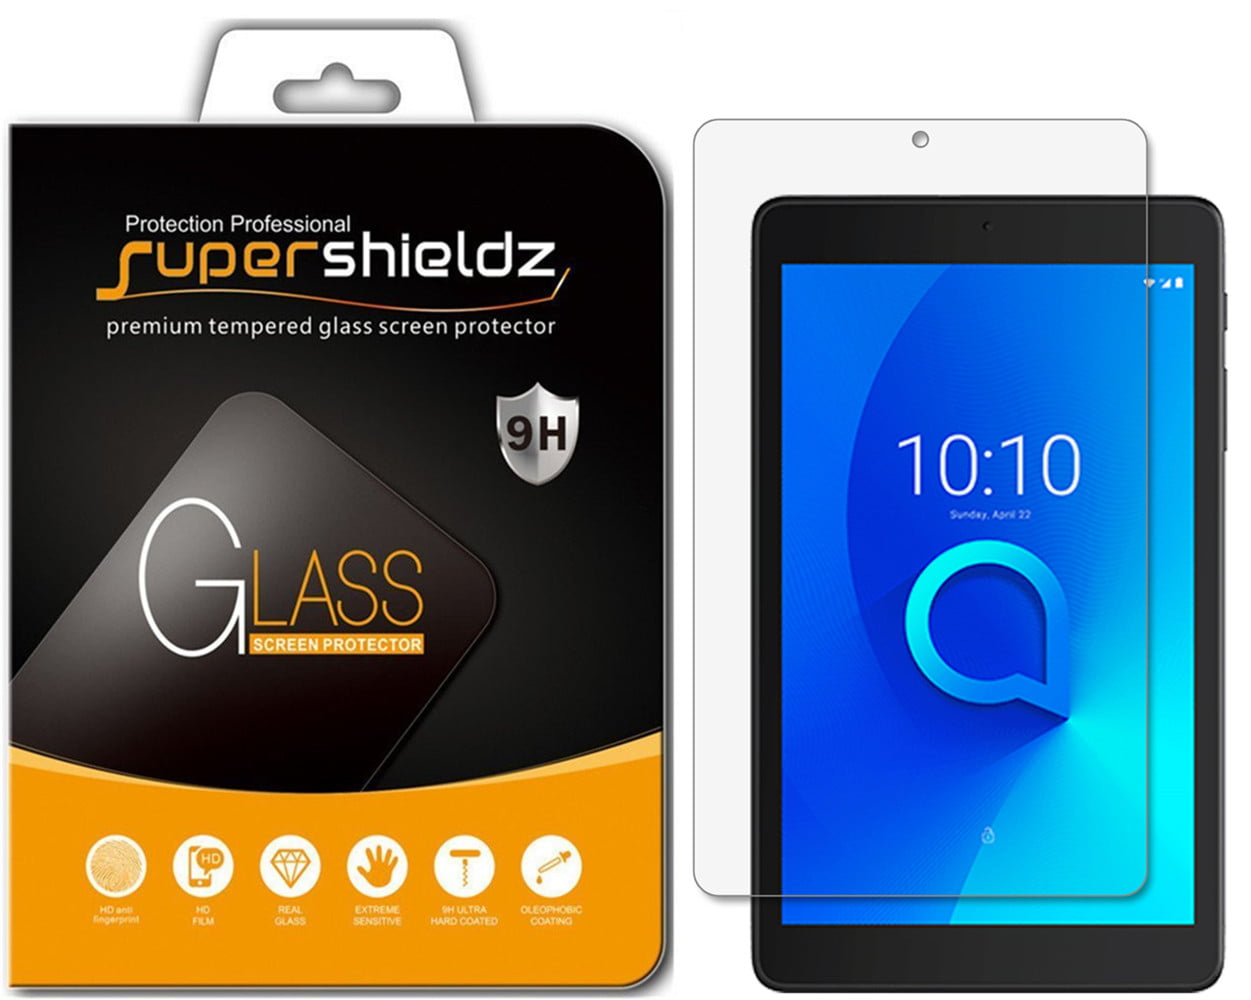 Premium Tempered Glass Screen Protector For Alcatel 3T 8 Tablet 2018 8.0 Inch 